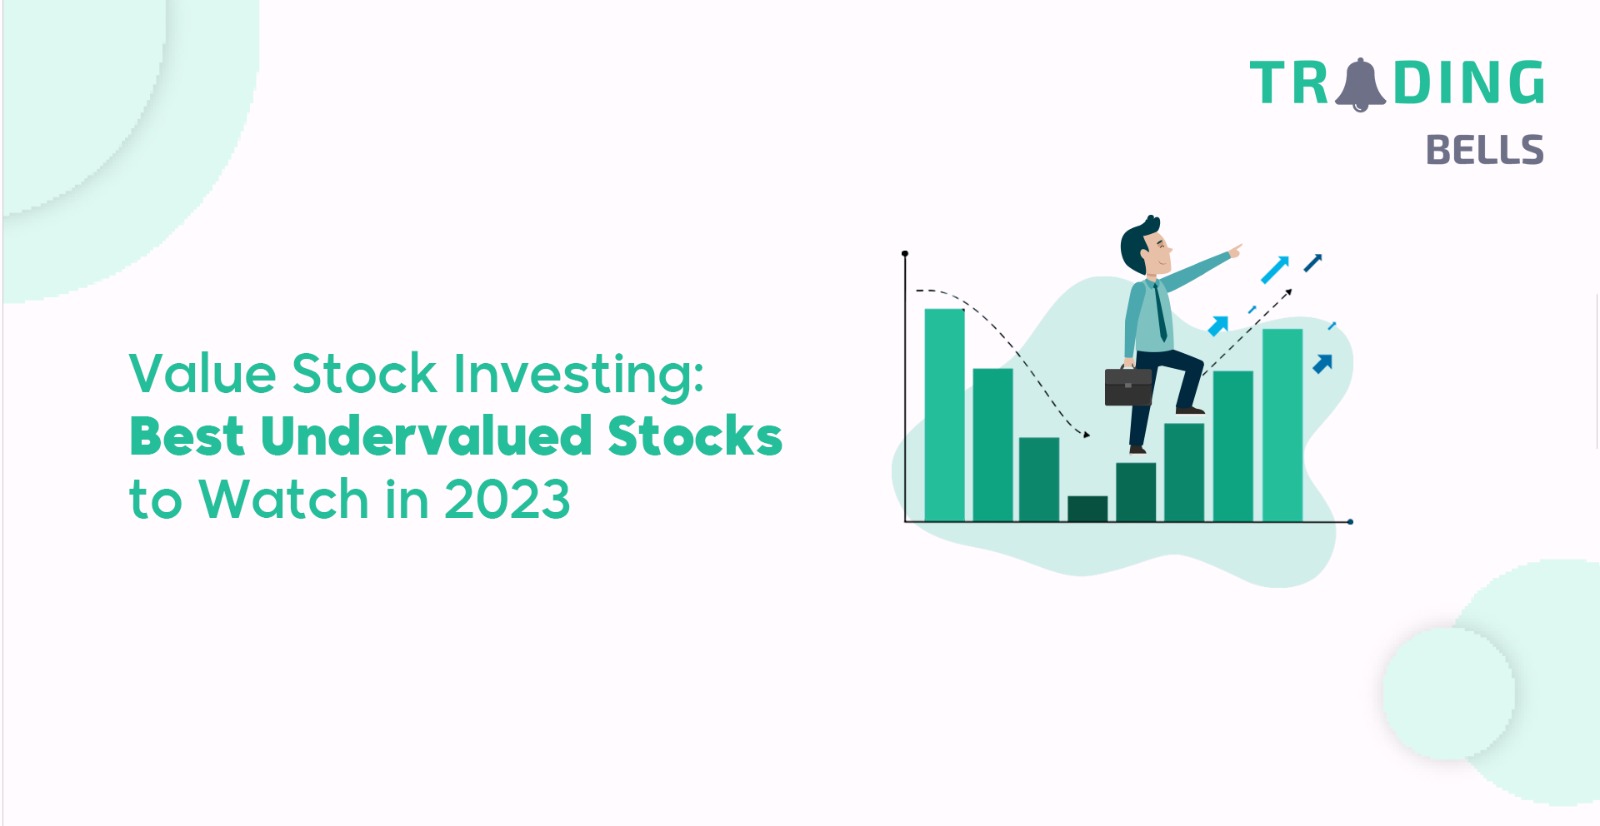 Best Undervalued Stocks to Watch in 2023